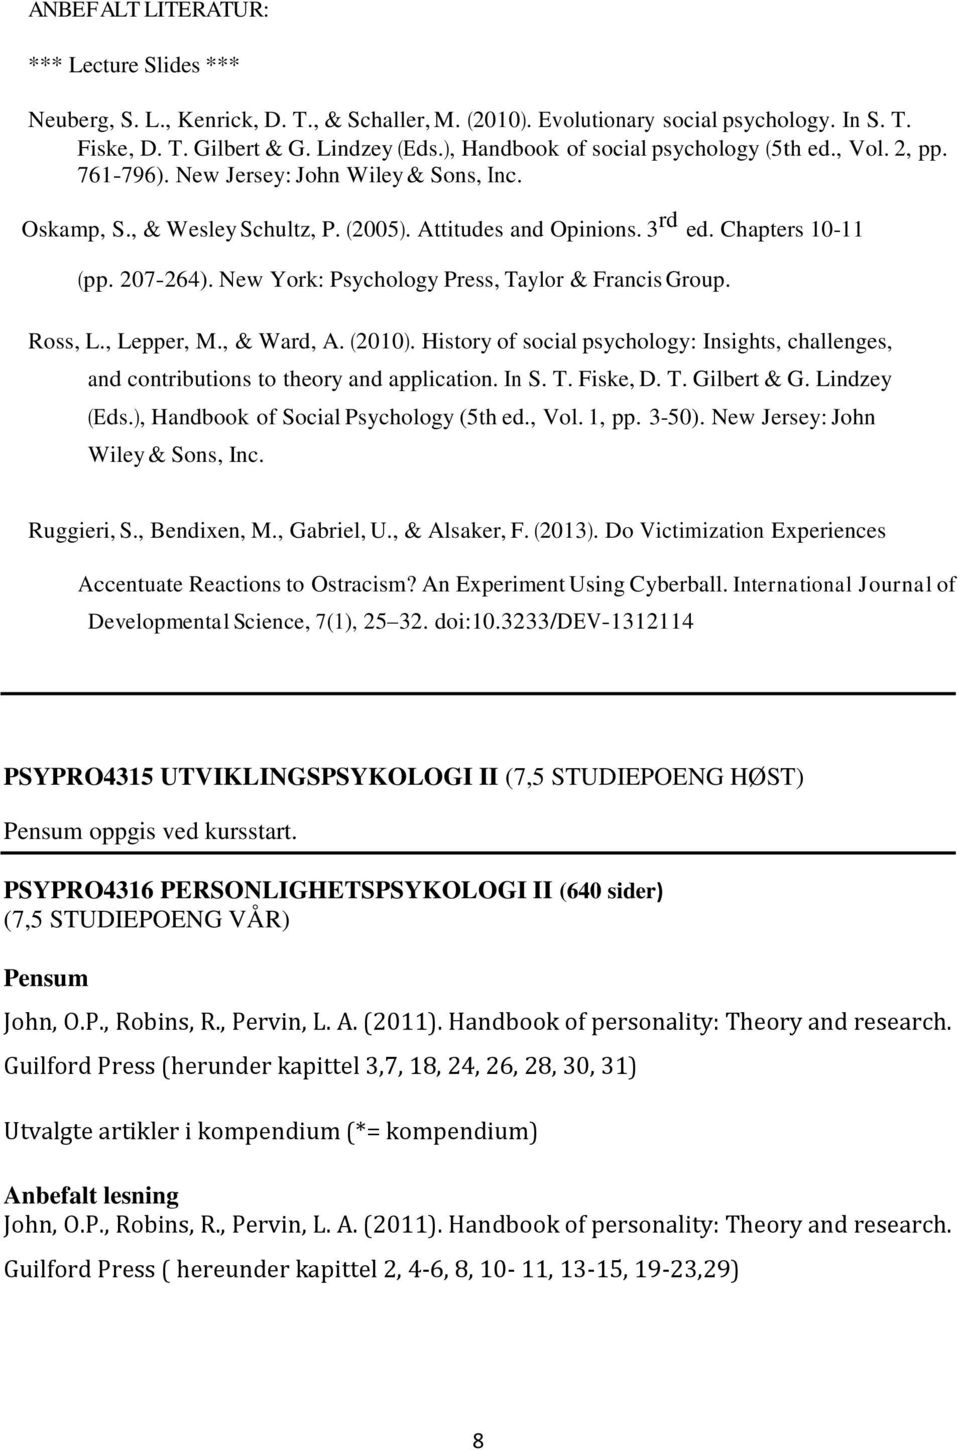 207-264). New York: Psychology Press, Taylor & Francis Group. Ross, L., Lepper, M., & Ward, A. (2010). History of social psychology: Insights, challenges, and contributions to theory and application.